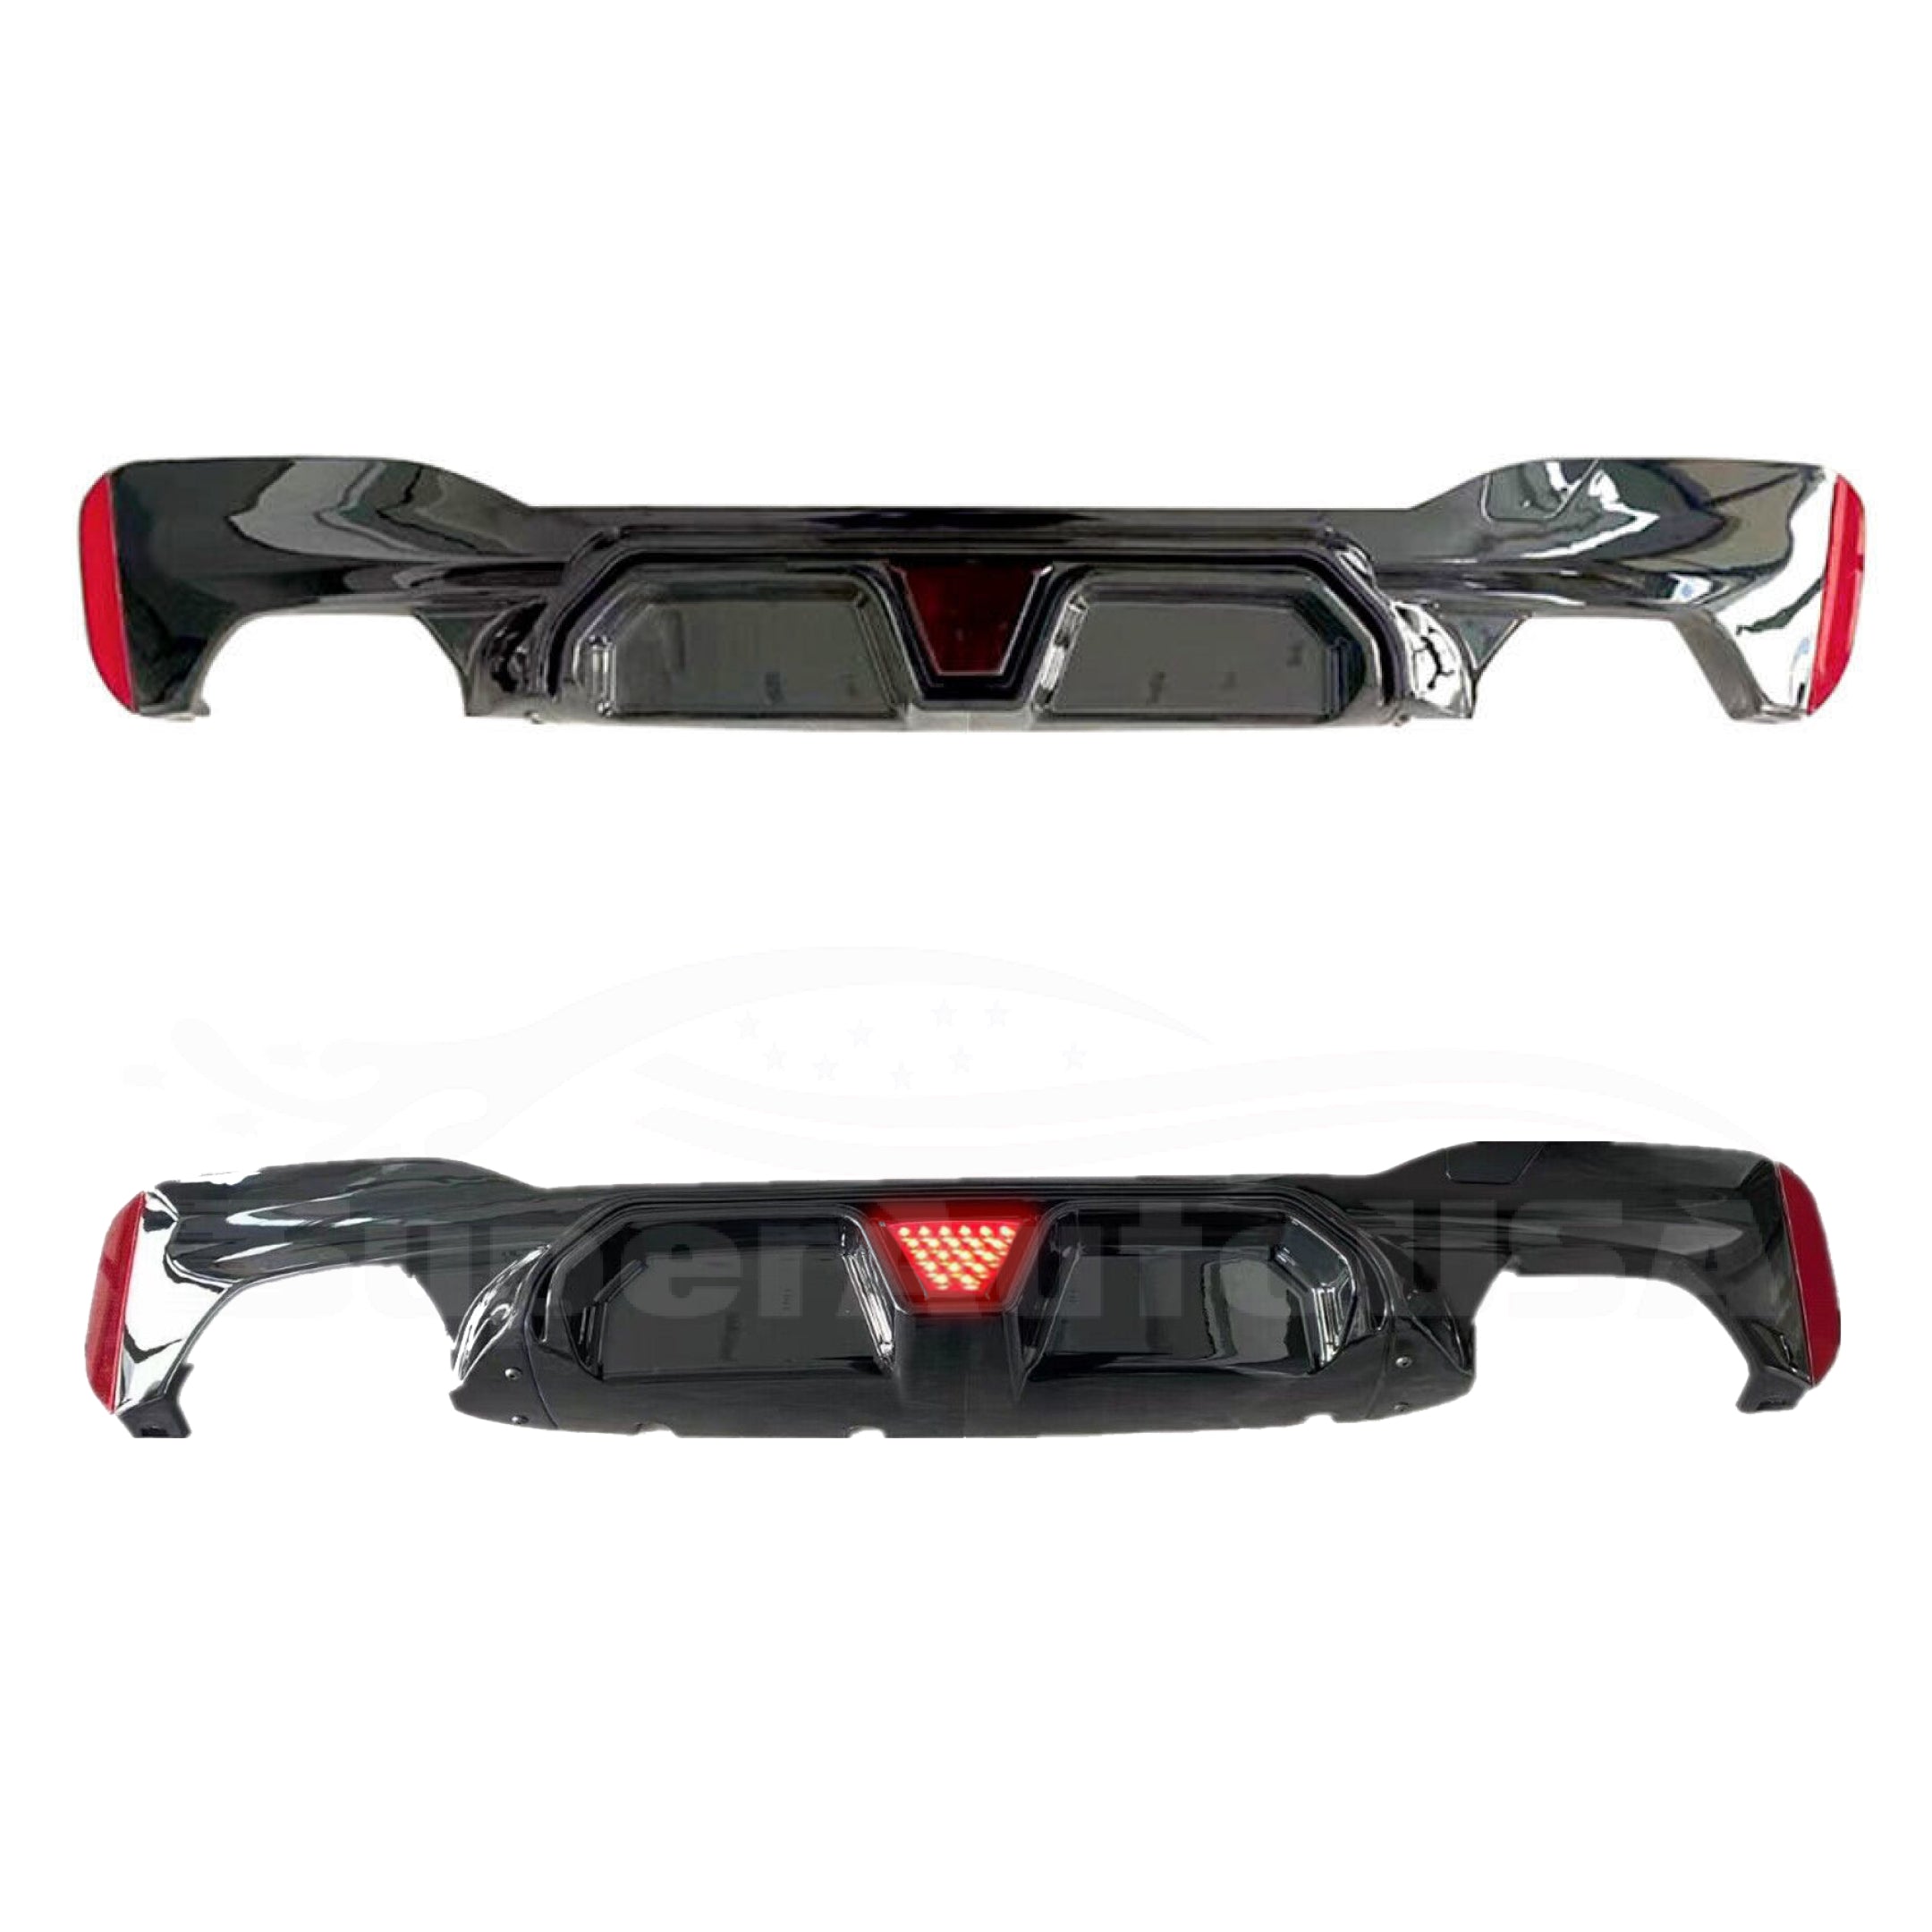 For 2017-2022 BMW 5 Series G30 Sedan Rear Bumper Diffuser with LED Light